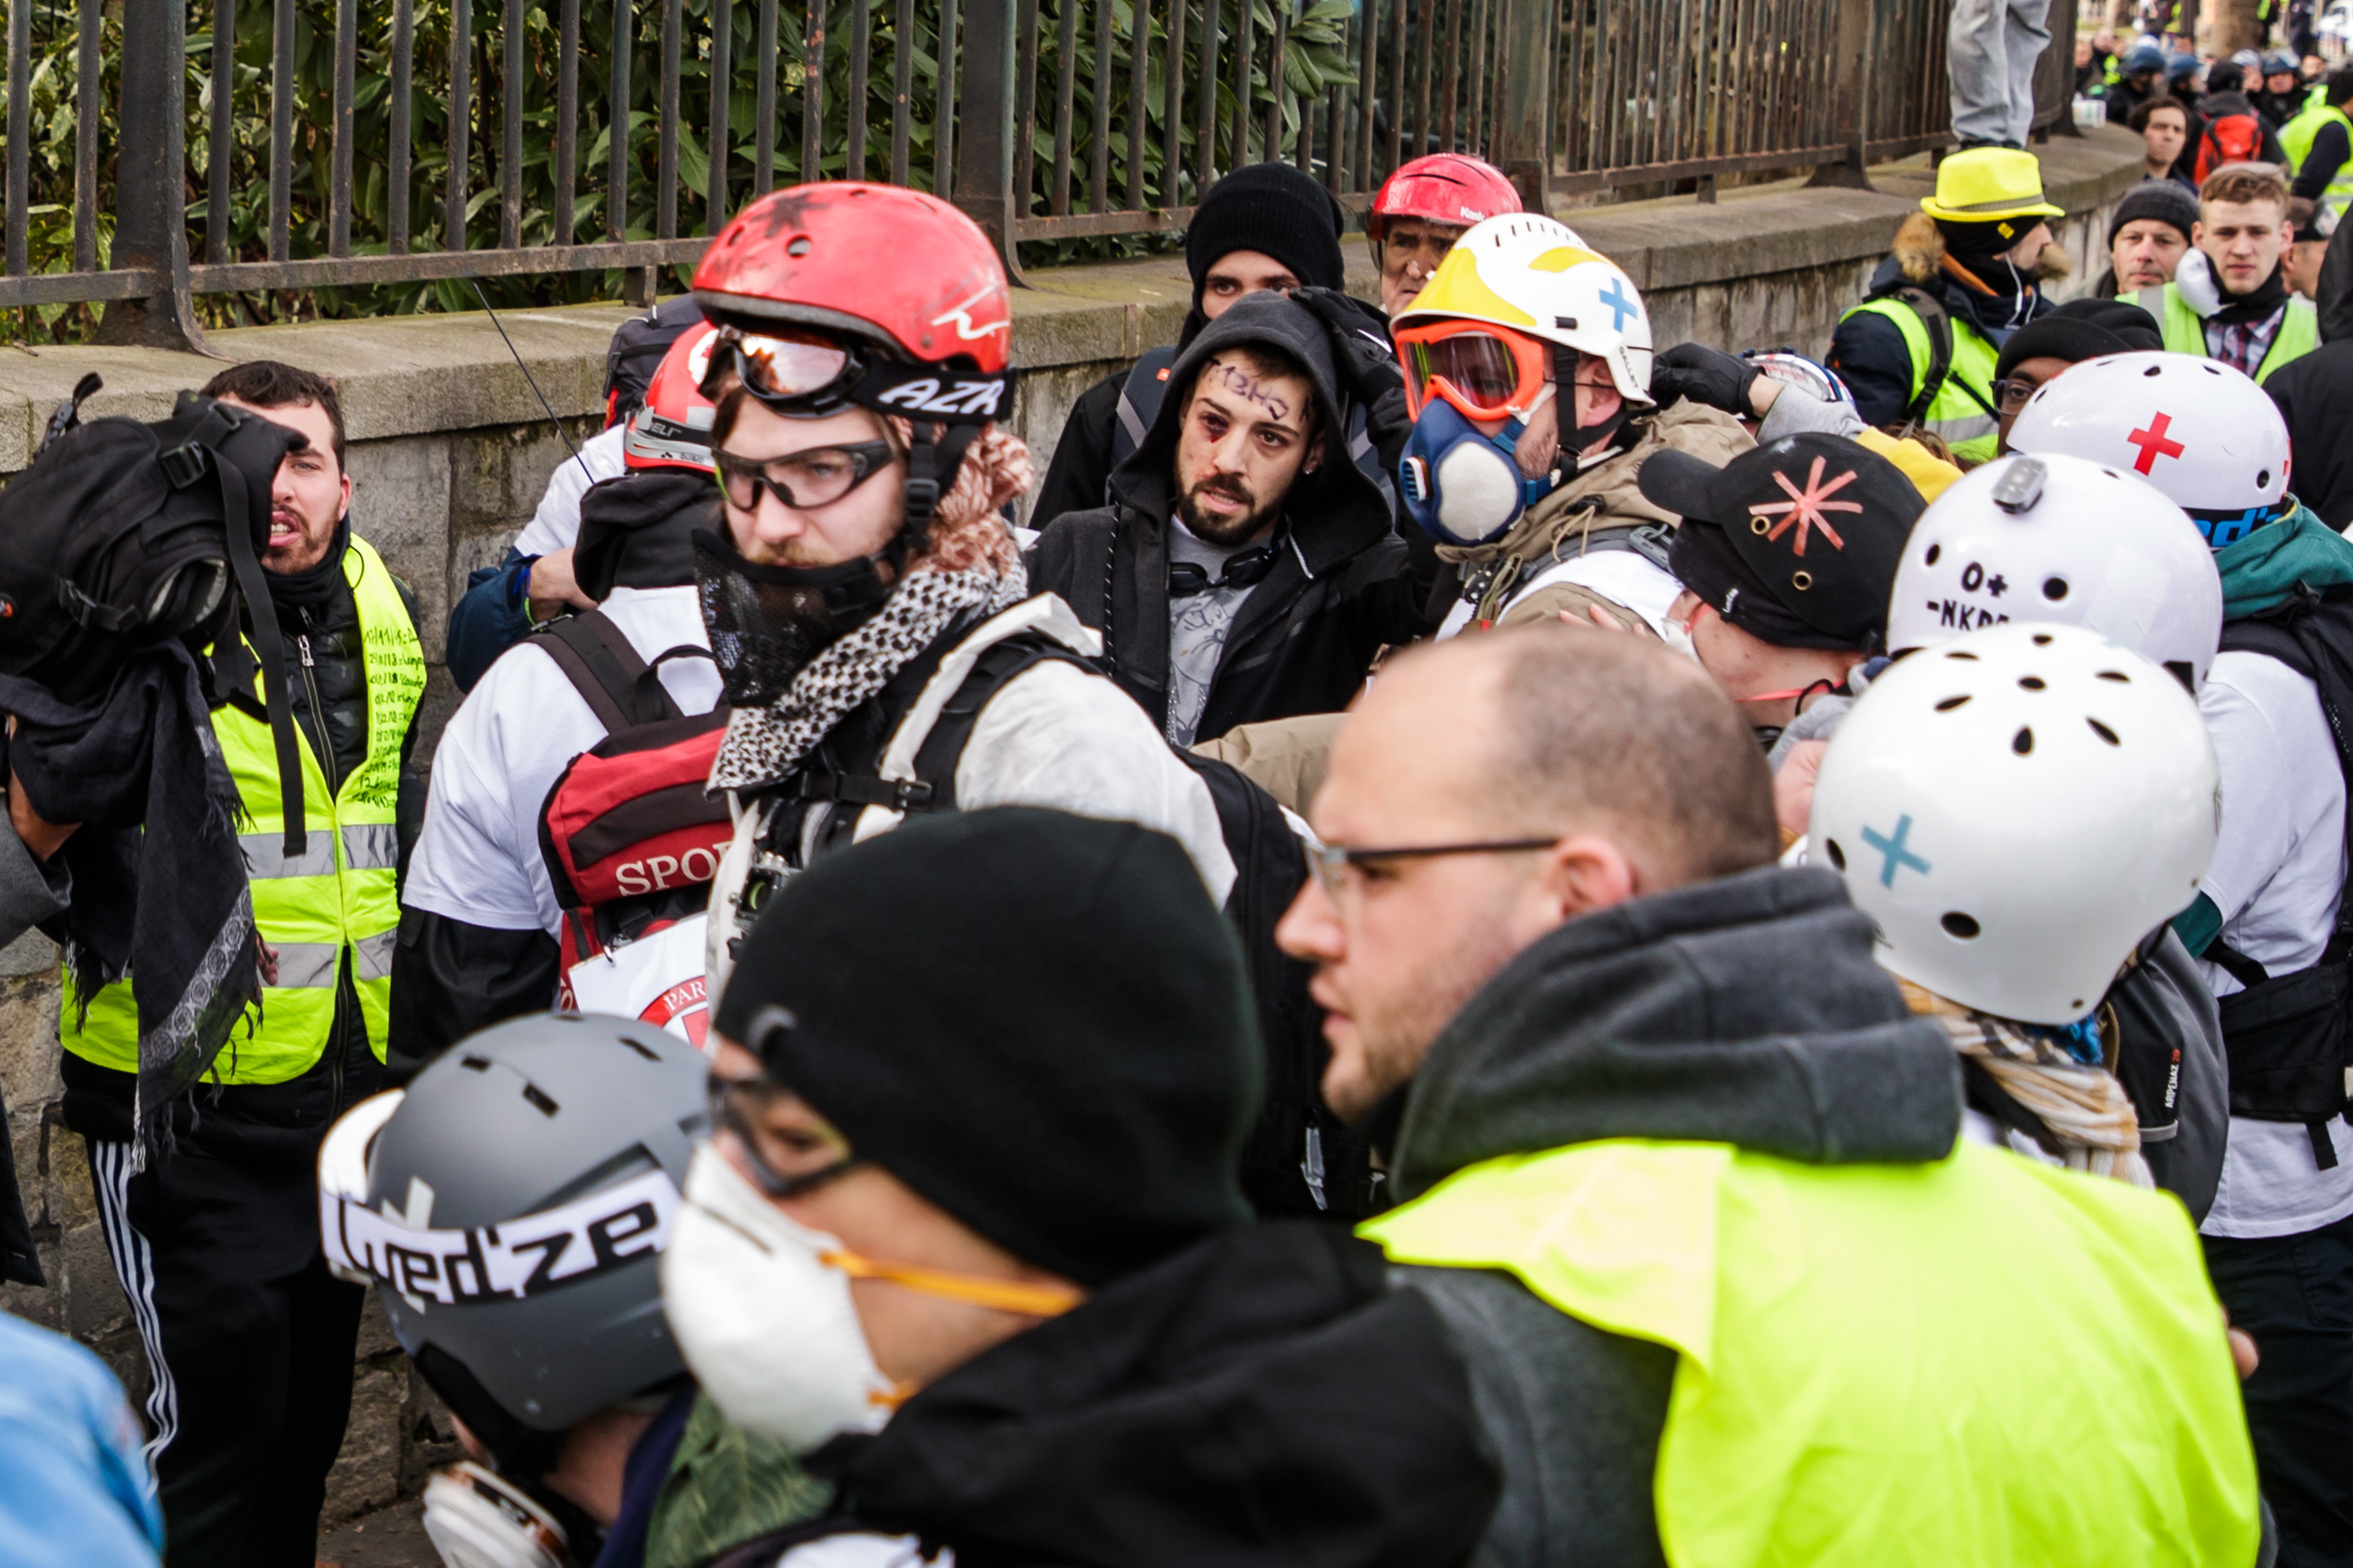 epa07356825 Street medics evacuate a protester (C-R) from the 'Gilets Jaunes' (Yellow Vests) movement after he was severely injured in the hand as clashes erupt during the 'Act XIII' demonstration, the 13th consecutive national protest on a Saturday, in Paris, France, 09 February 2019. The so-called 'Gilets Jaunes' is a grassroots protest movement with supporters from a wide span of the political spectrum, that originally started with protest across the nation in late 2018 against high fuel prices. The movement in the meantime also protests the French government's tax reforms, the increasing costs of living and some even call for the resignation of French President Emmanuel Macron.  EPA/CHRISTOPHE PETIT TESSON